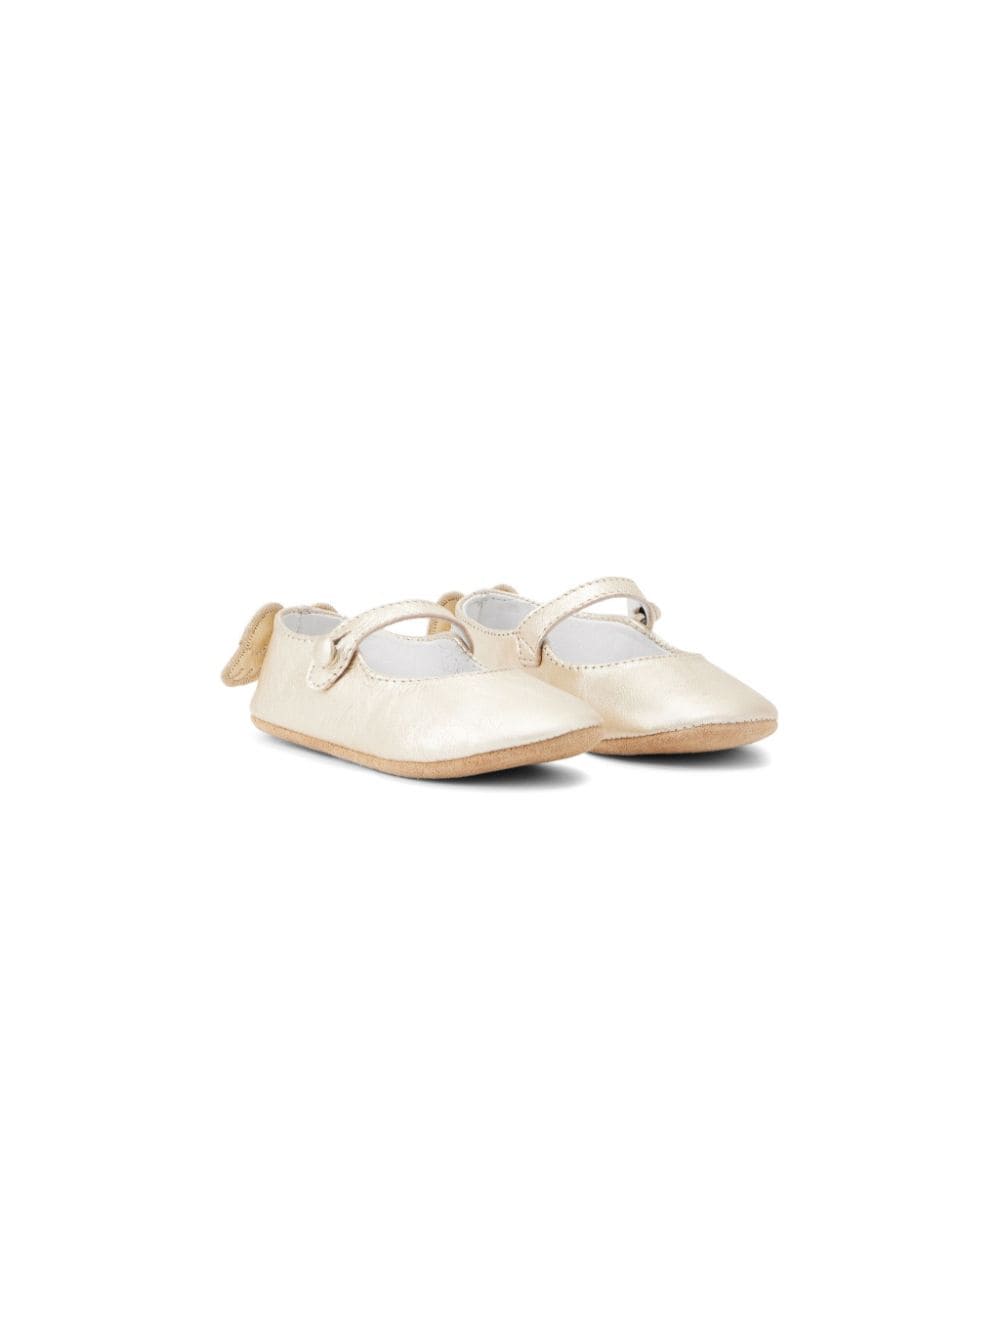 Marie-Chantal Olympia Angel Wing leather ballerina shoes - Gold von Marie-Chantal